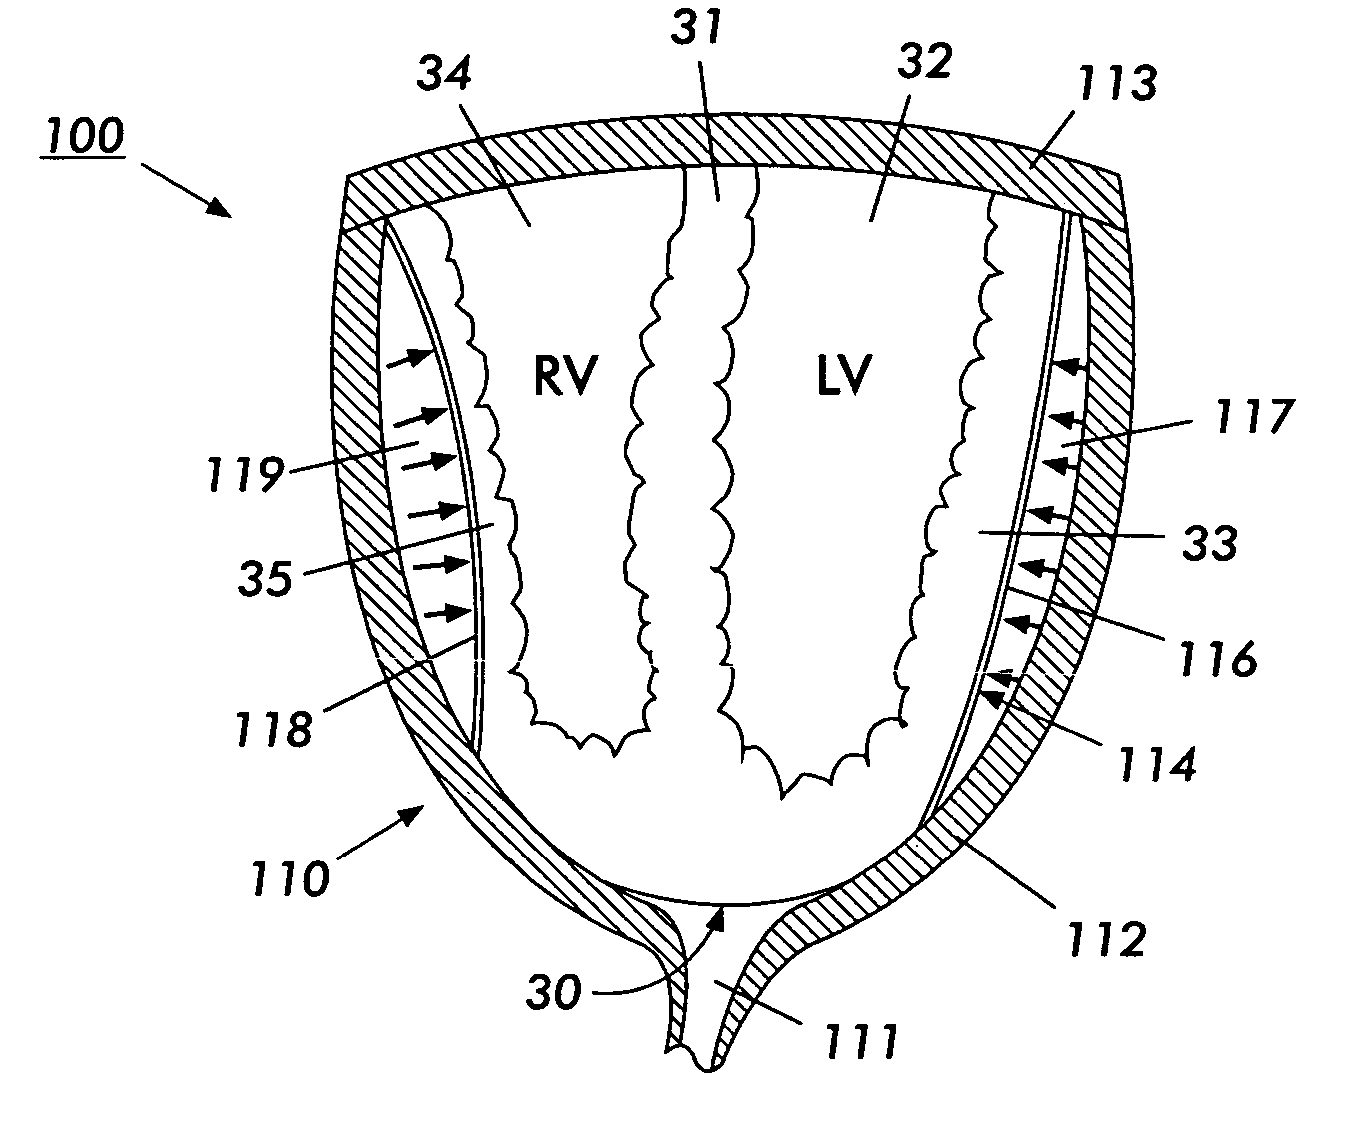 Therapeutic agent delivery apparatus with direct mechanical ventricular assistance capability